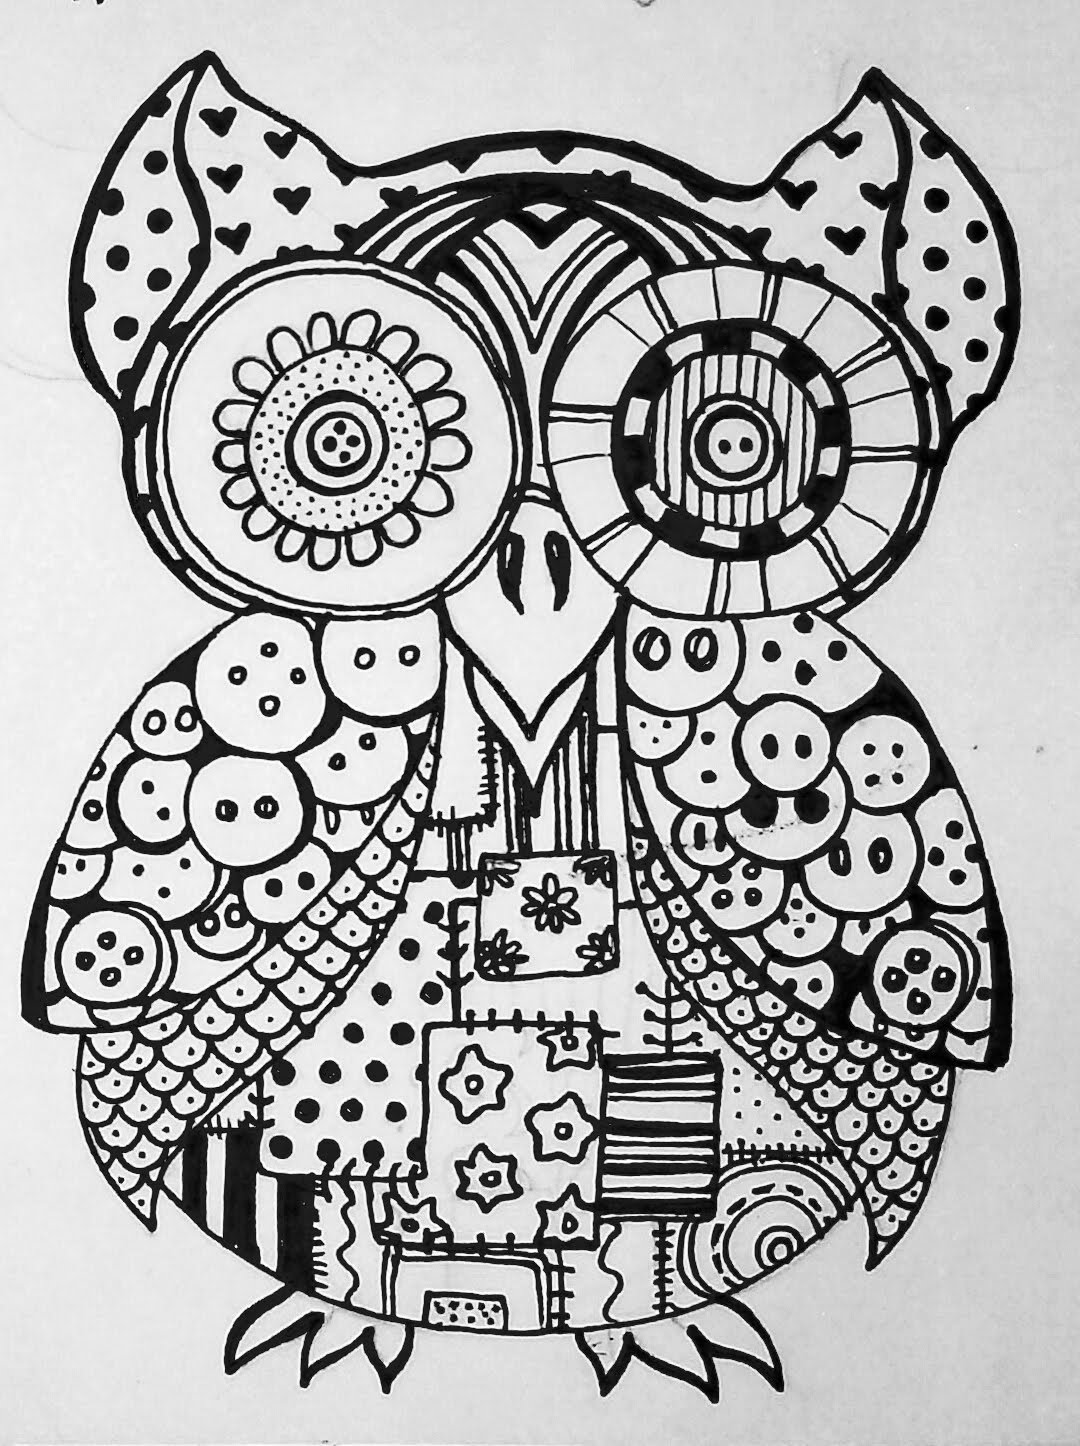 10 Pics of Extreme Coloring Pages Owls - Mosaic Patterns Coloring ...